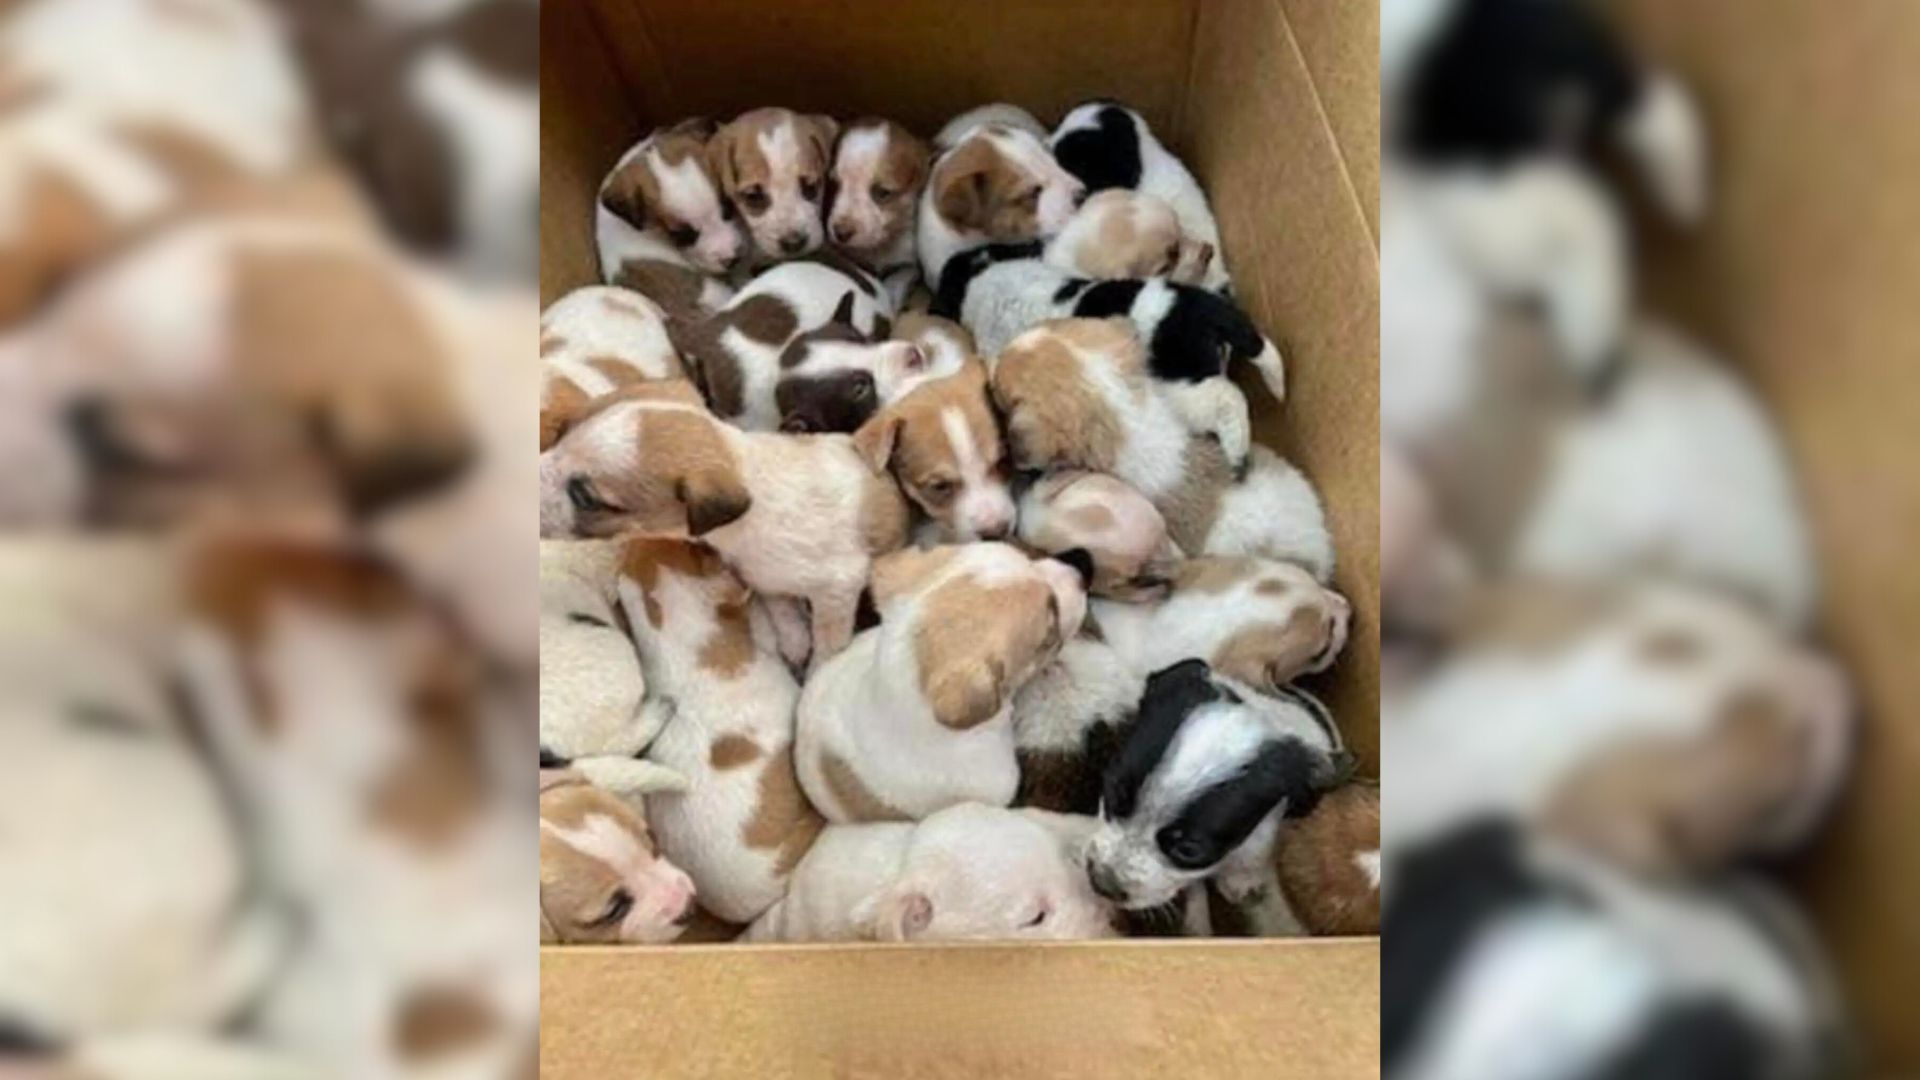 People Shocked To Find 30 Helpless Babies Abandoned In A Box On The Side Of The Road